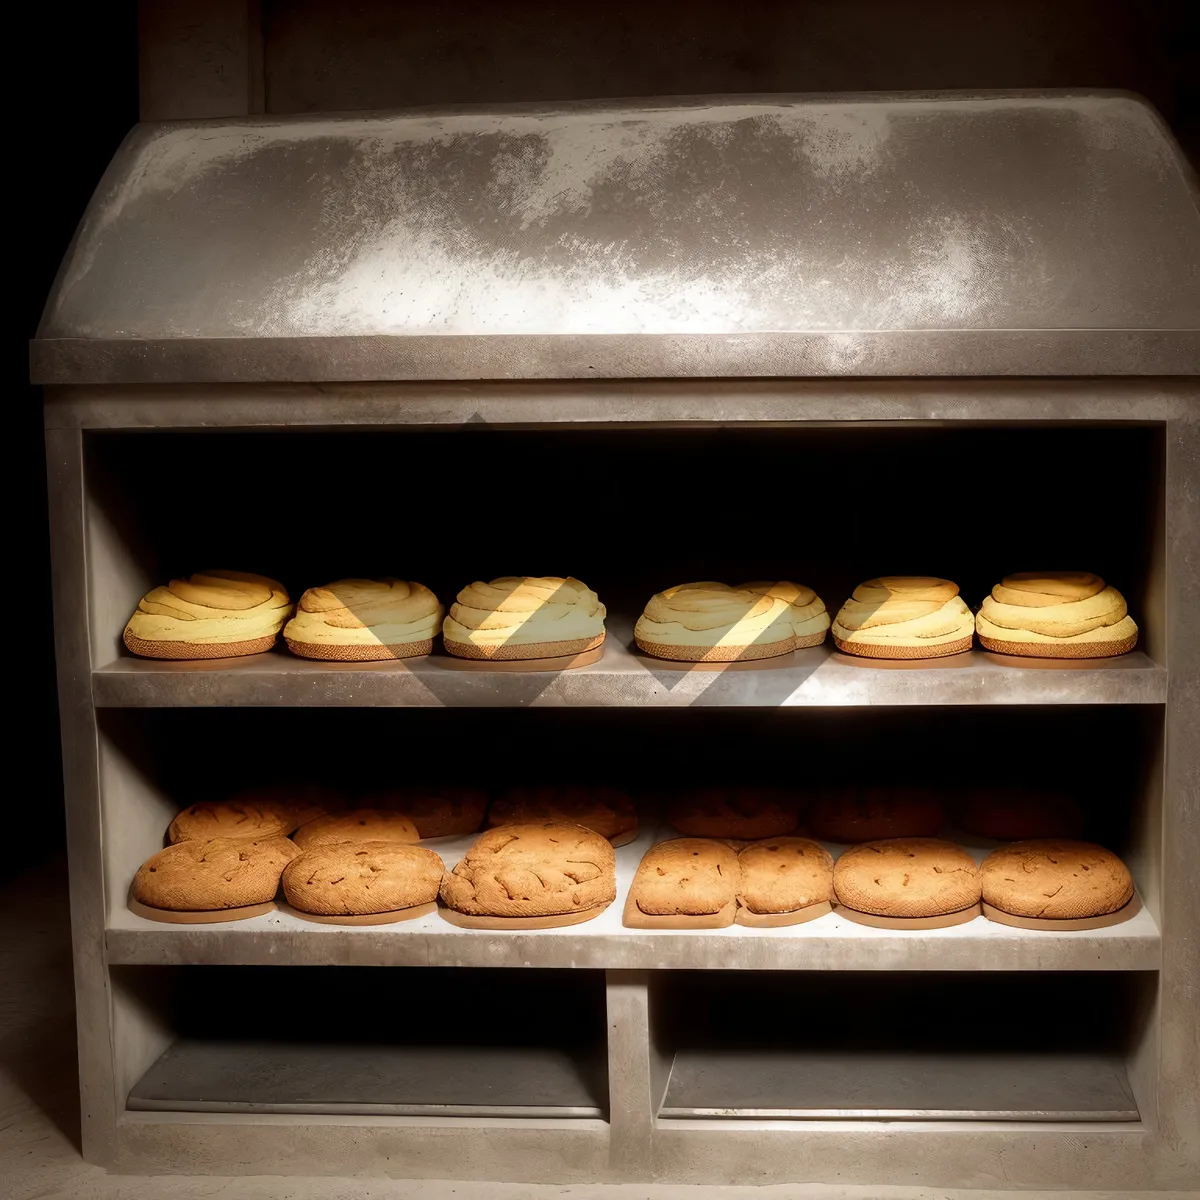 Picture of Bakery's Freshly Baked Delicacies on Display